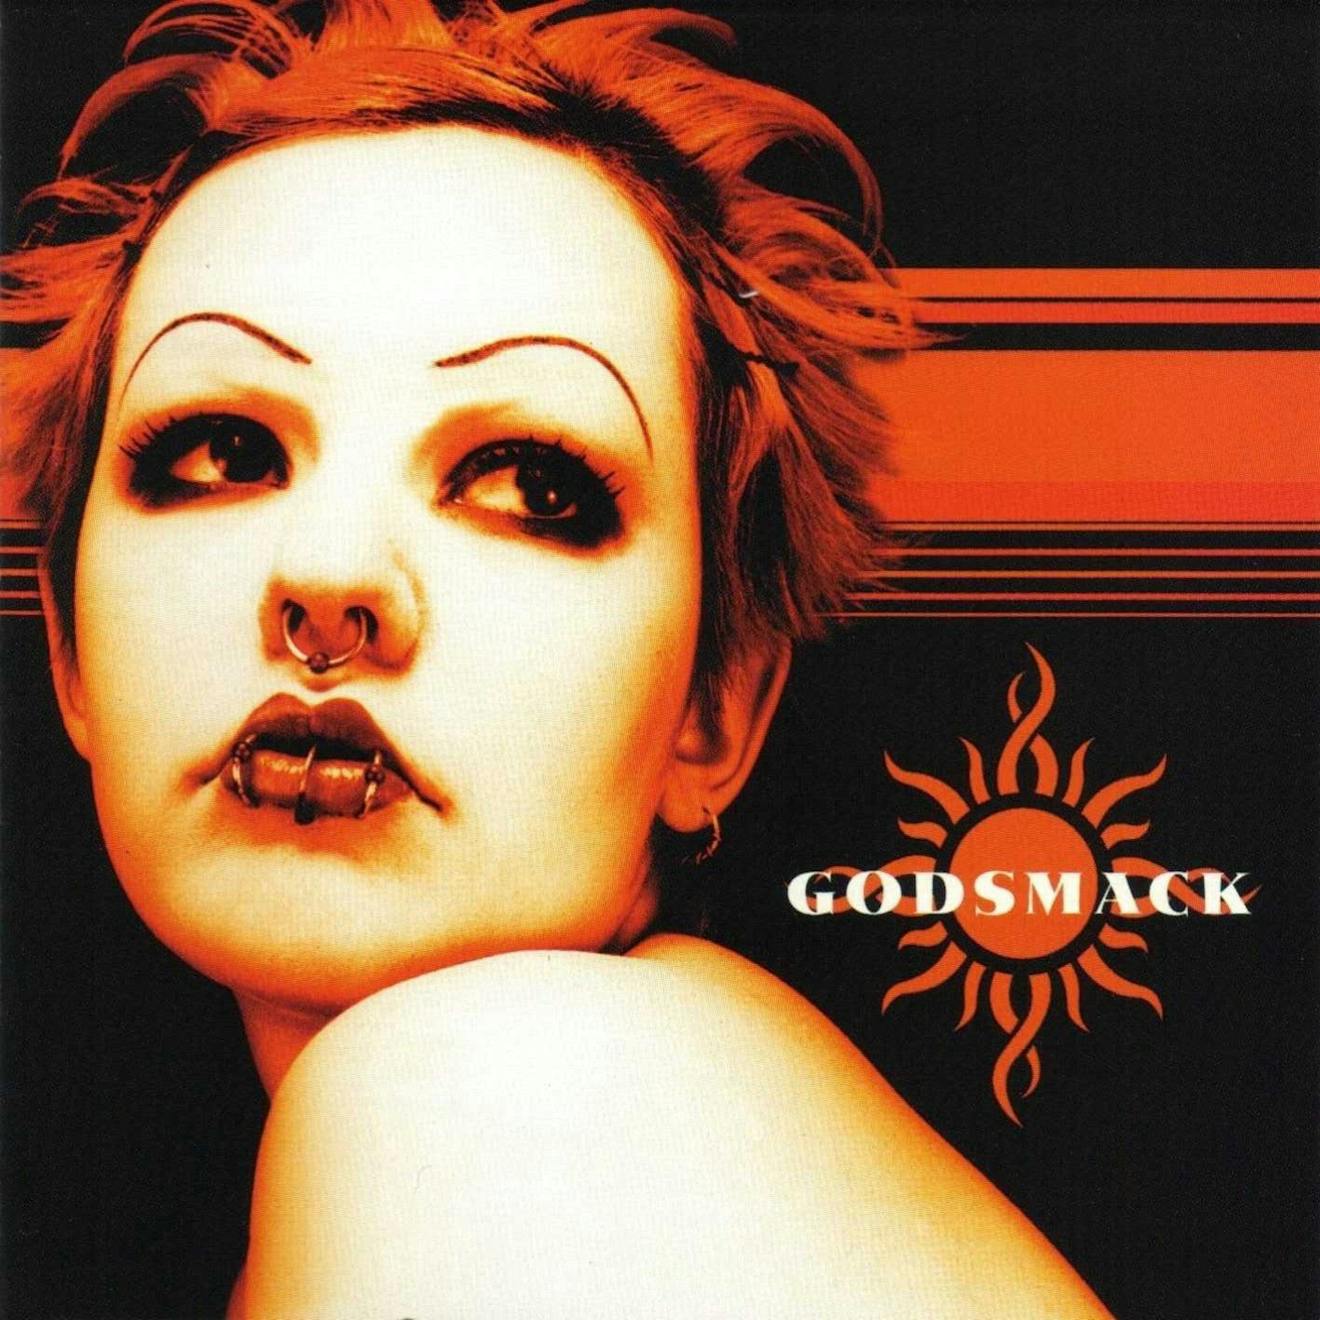 What The Girl From The Cover Of Godsmack's Debut Looks Like Now — Kerrang!